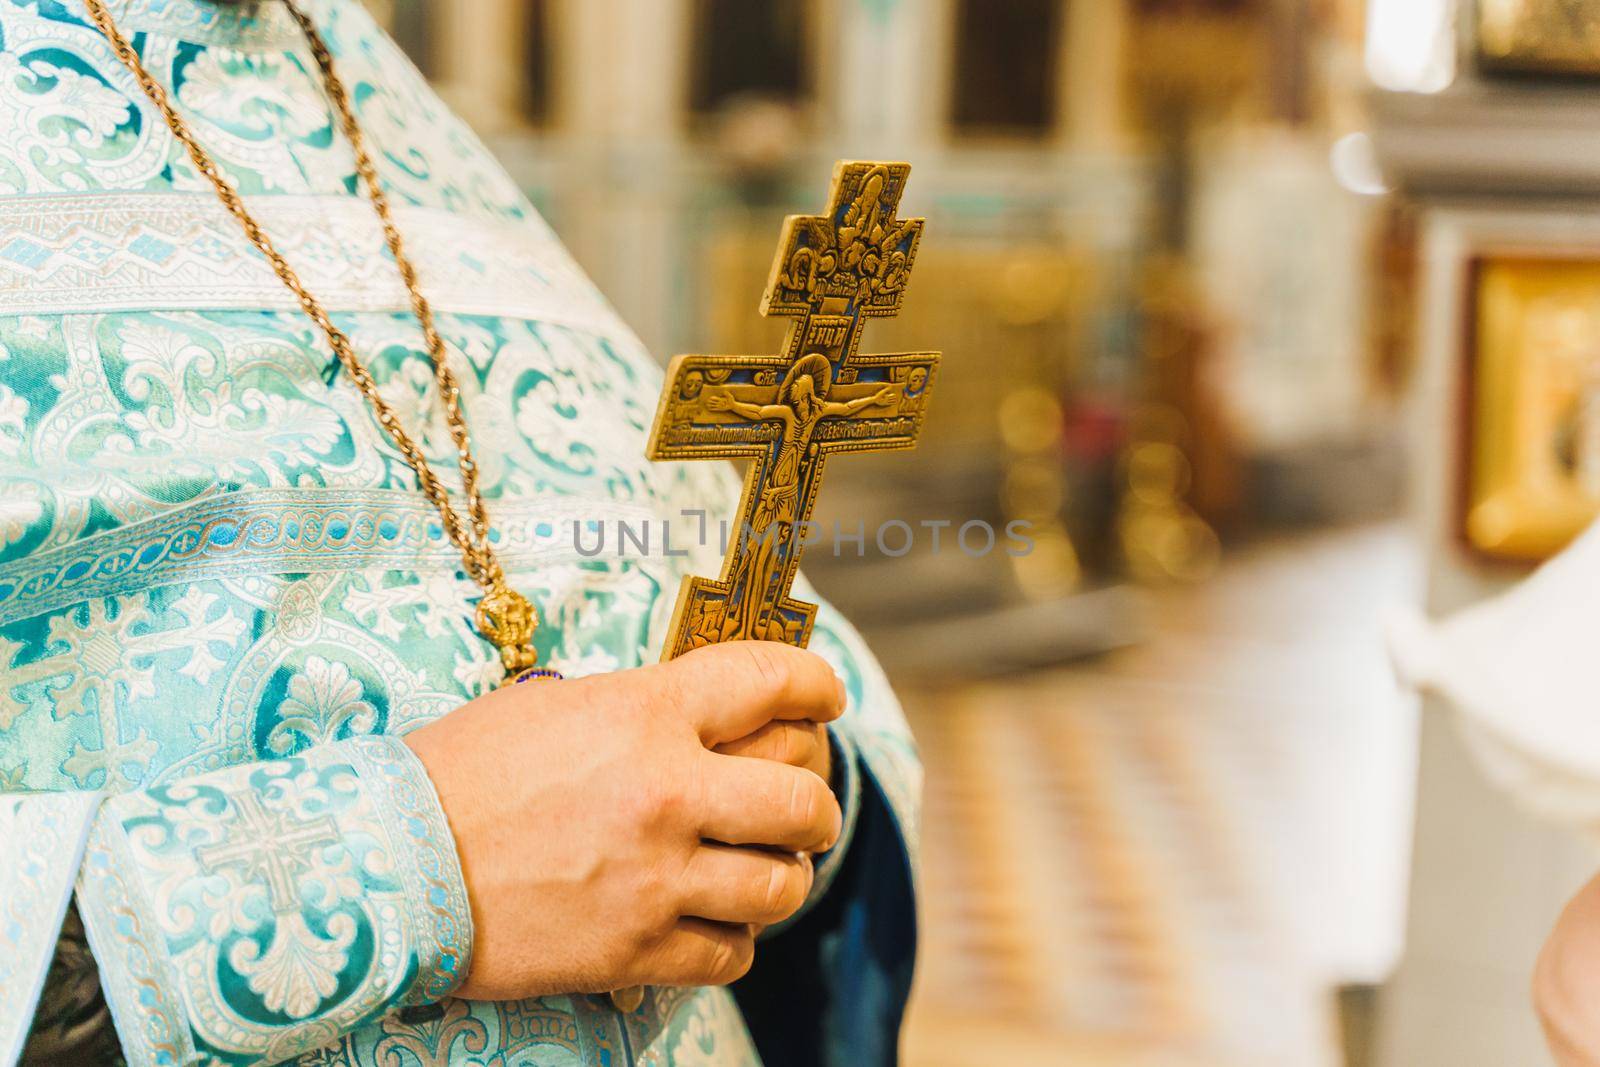 Holy father in his robe with a golden cross in his hands in church. Orthodox tradition and faith. Equipment for praying. Pray for people life. Pray to god